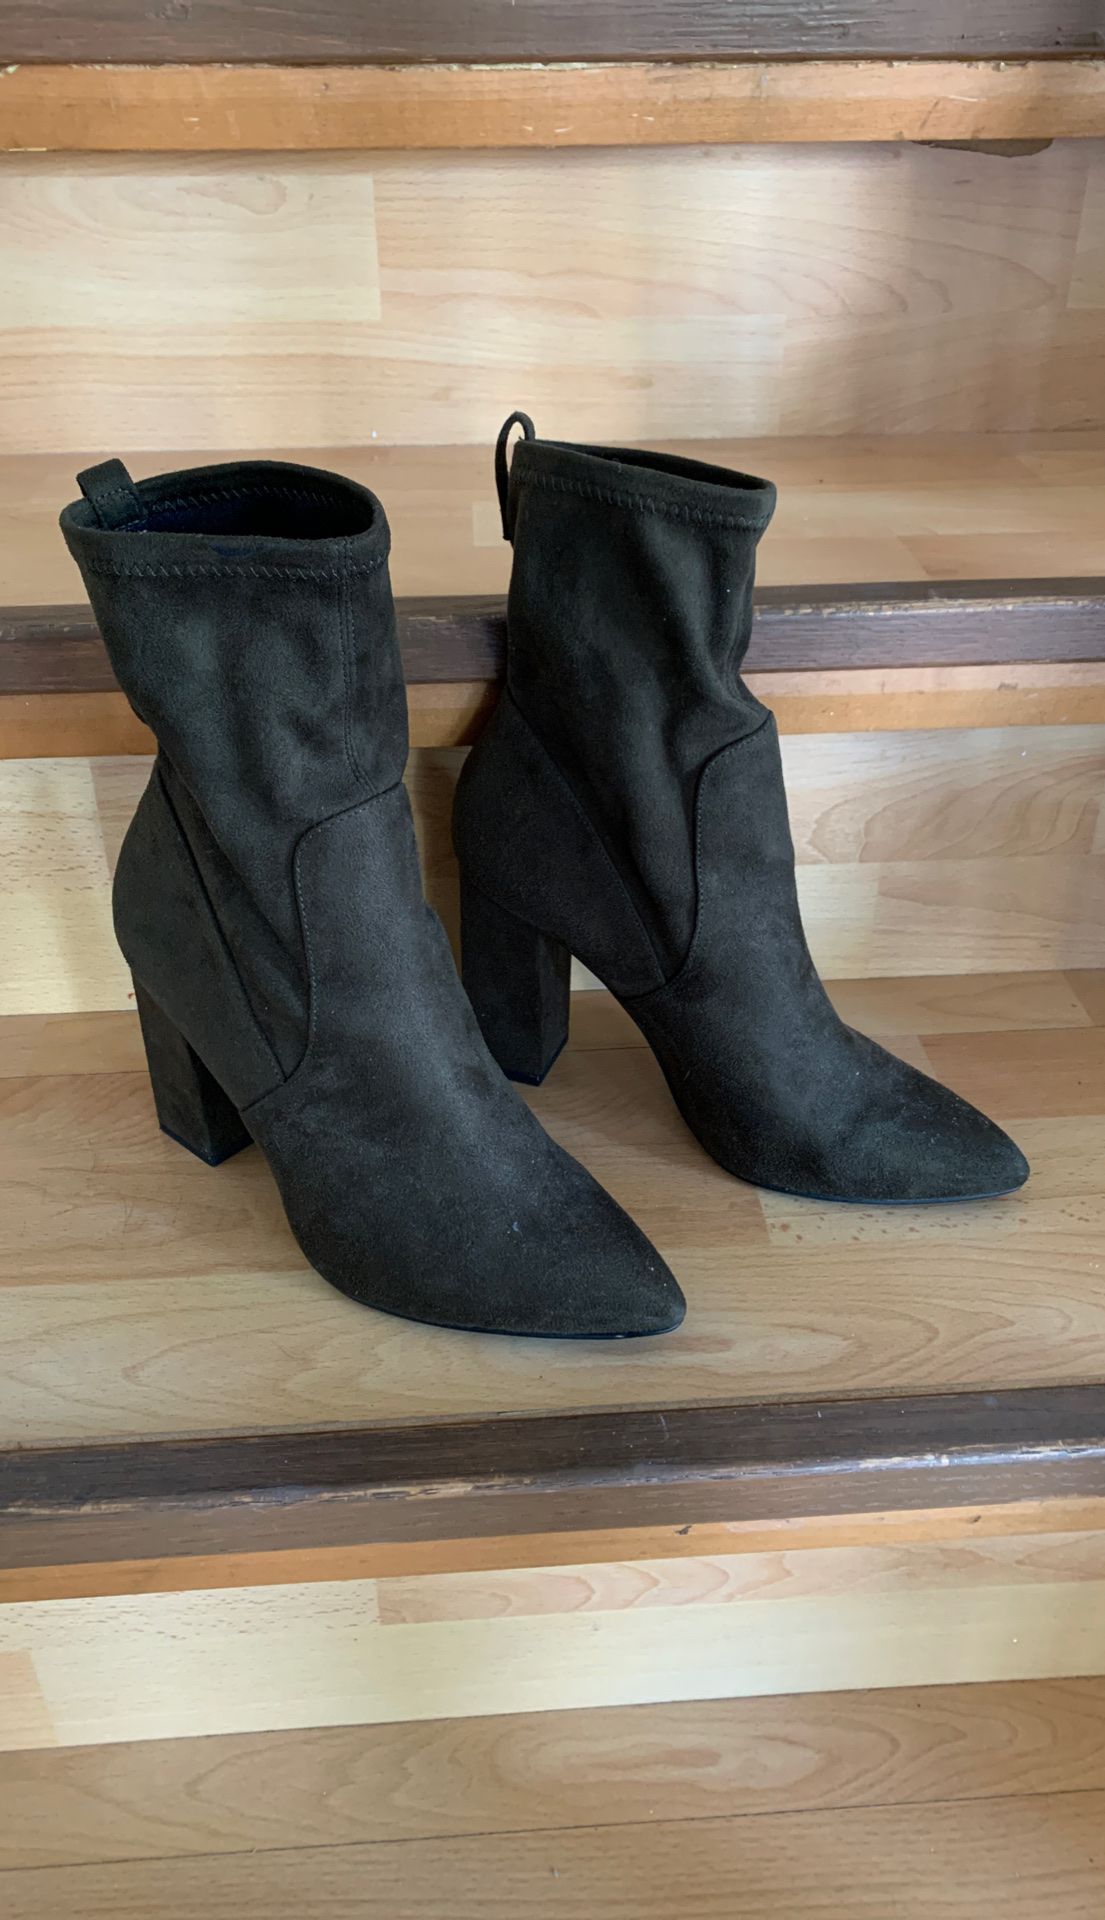 Women’s H&M slip on boots. Like new. Worn once.